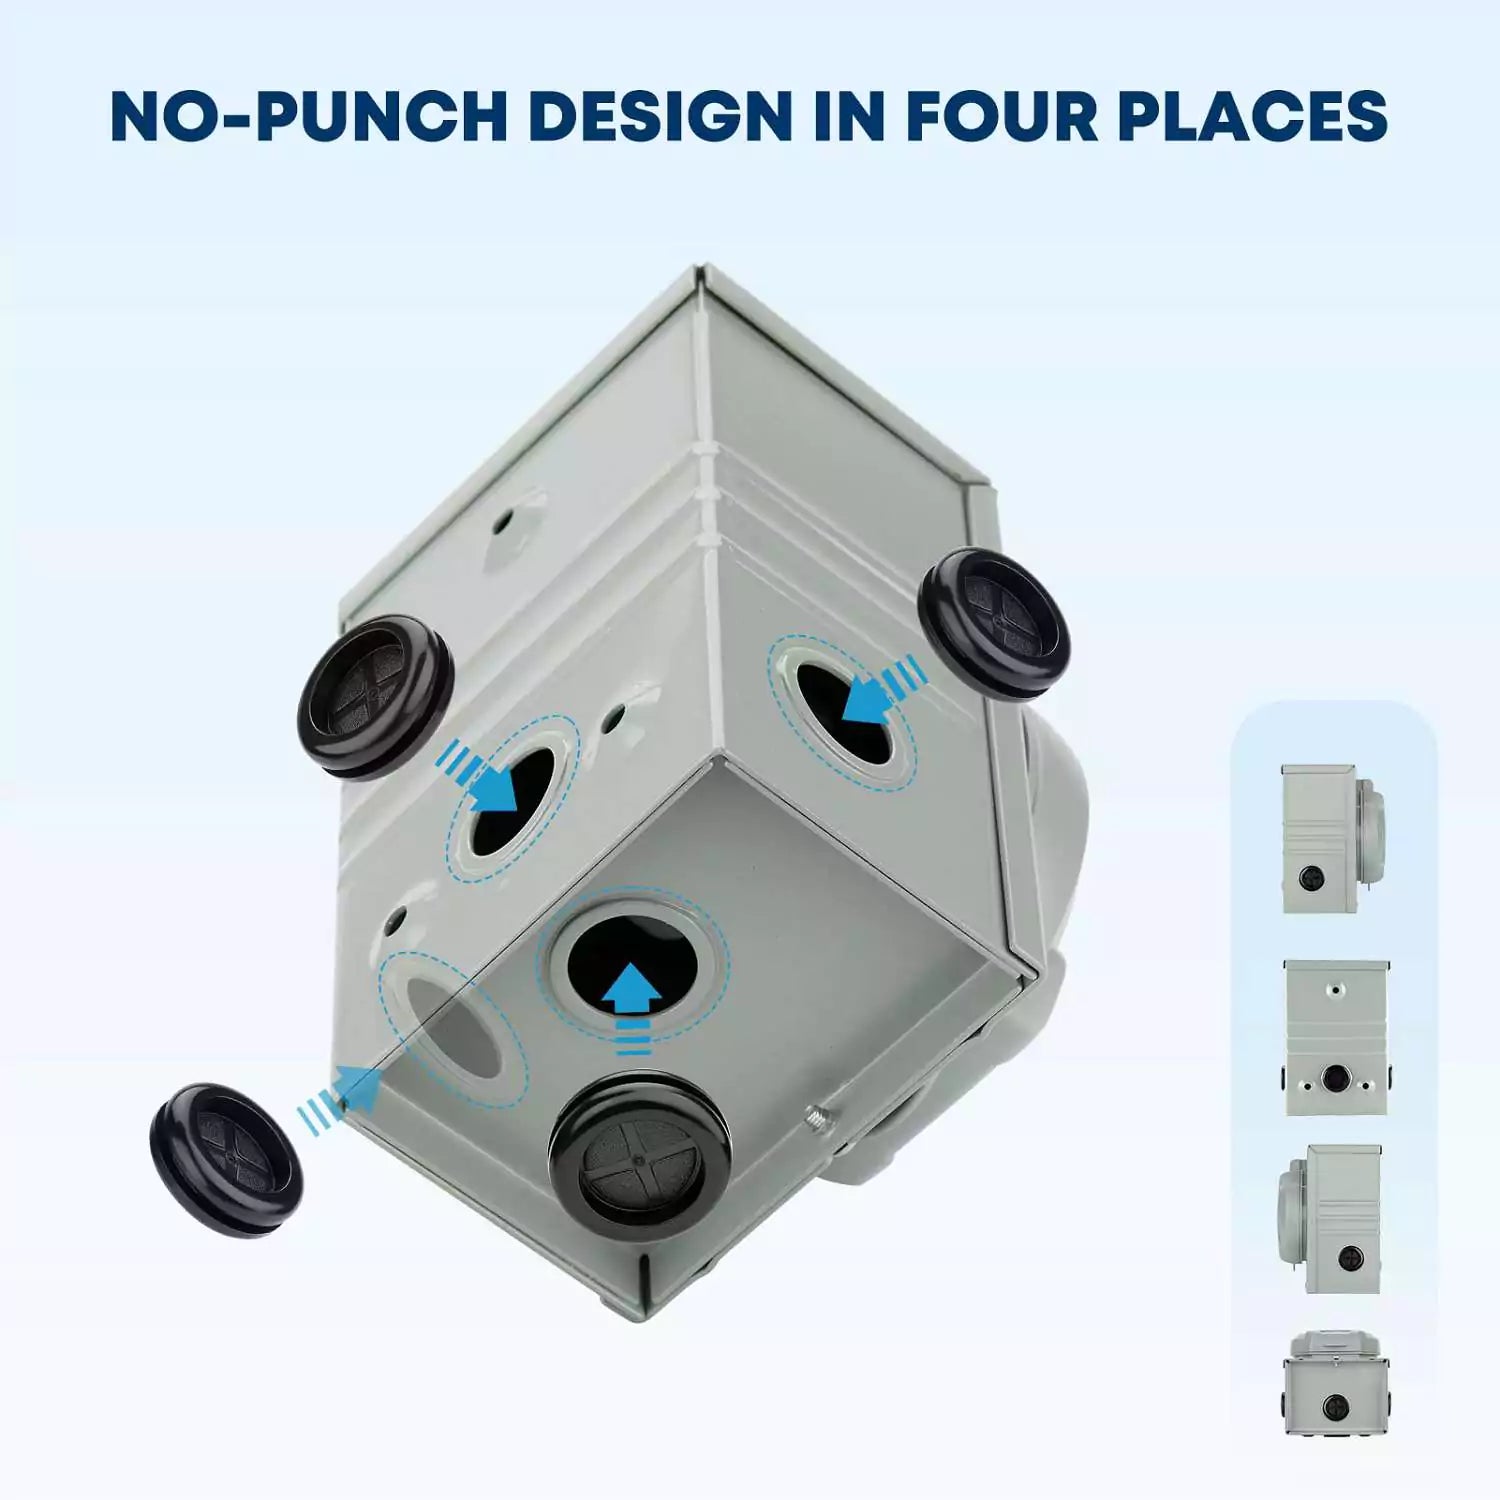 No punch design in four places 50 amp inlet box for generator